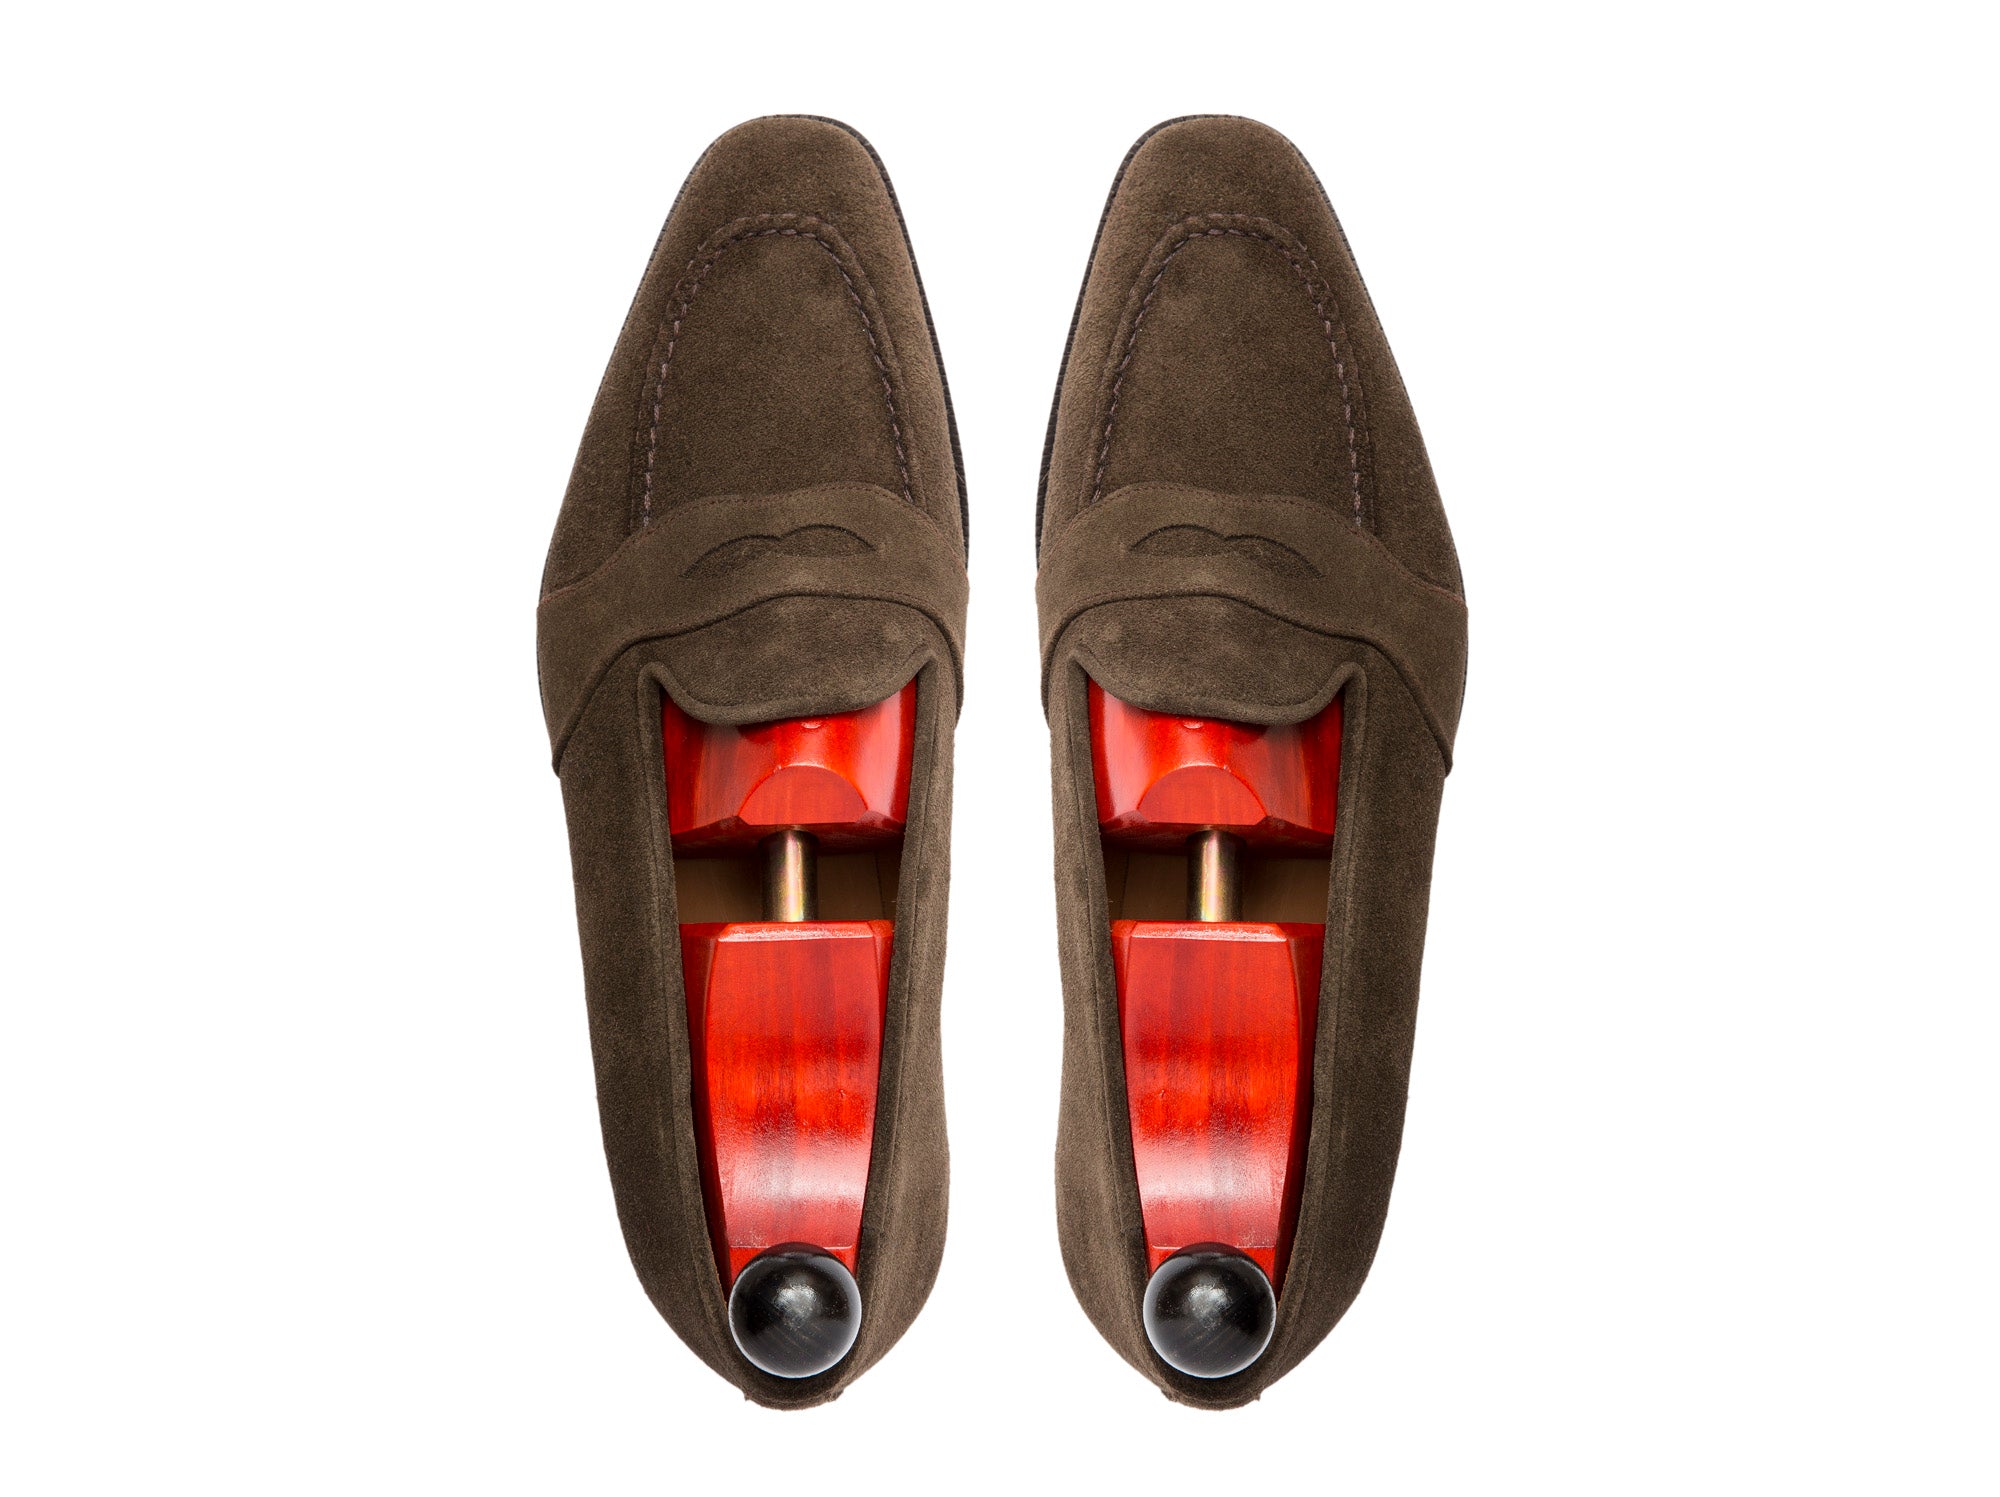 Madison - MTO - Moss Suede - LPB Last - Single Leather Sole